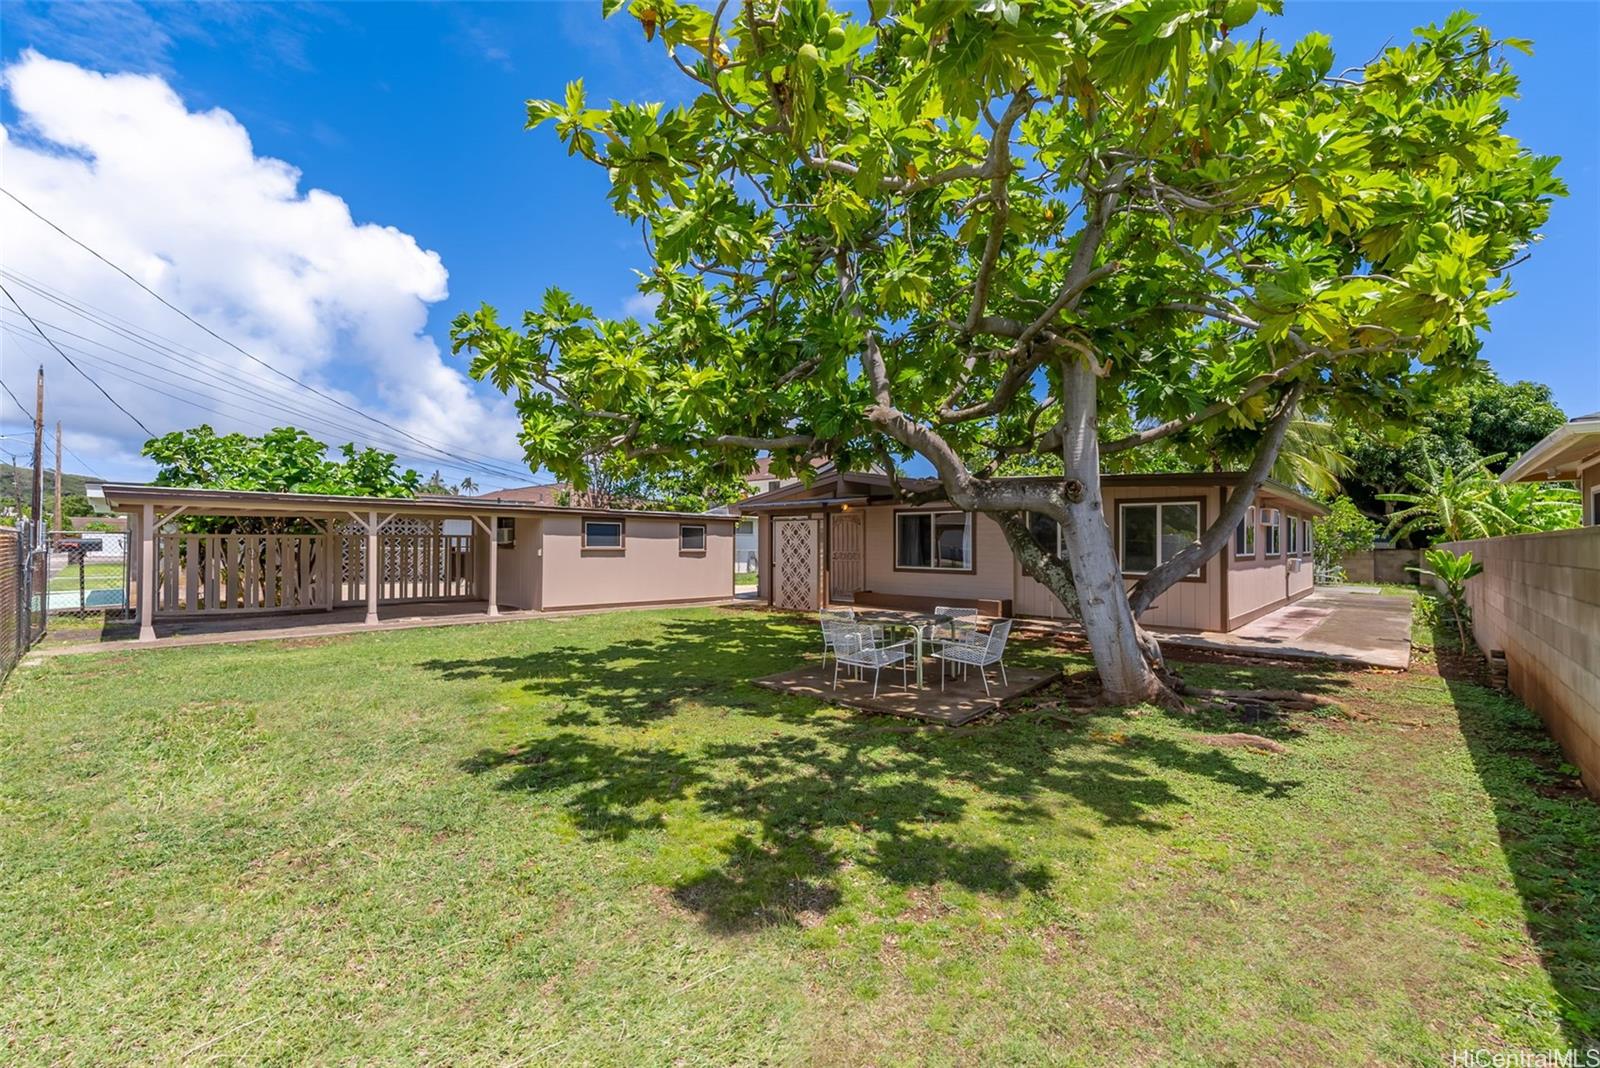 Welcome home to 5631 Pia Street in highly desired Niu Valley in East Oahu!